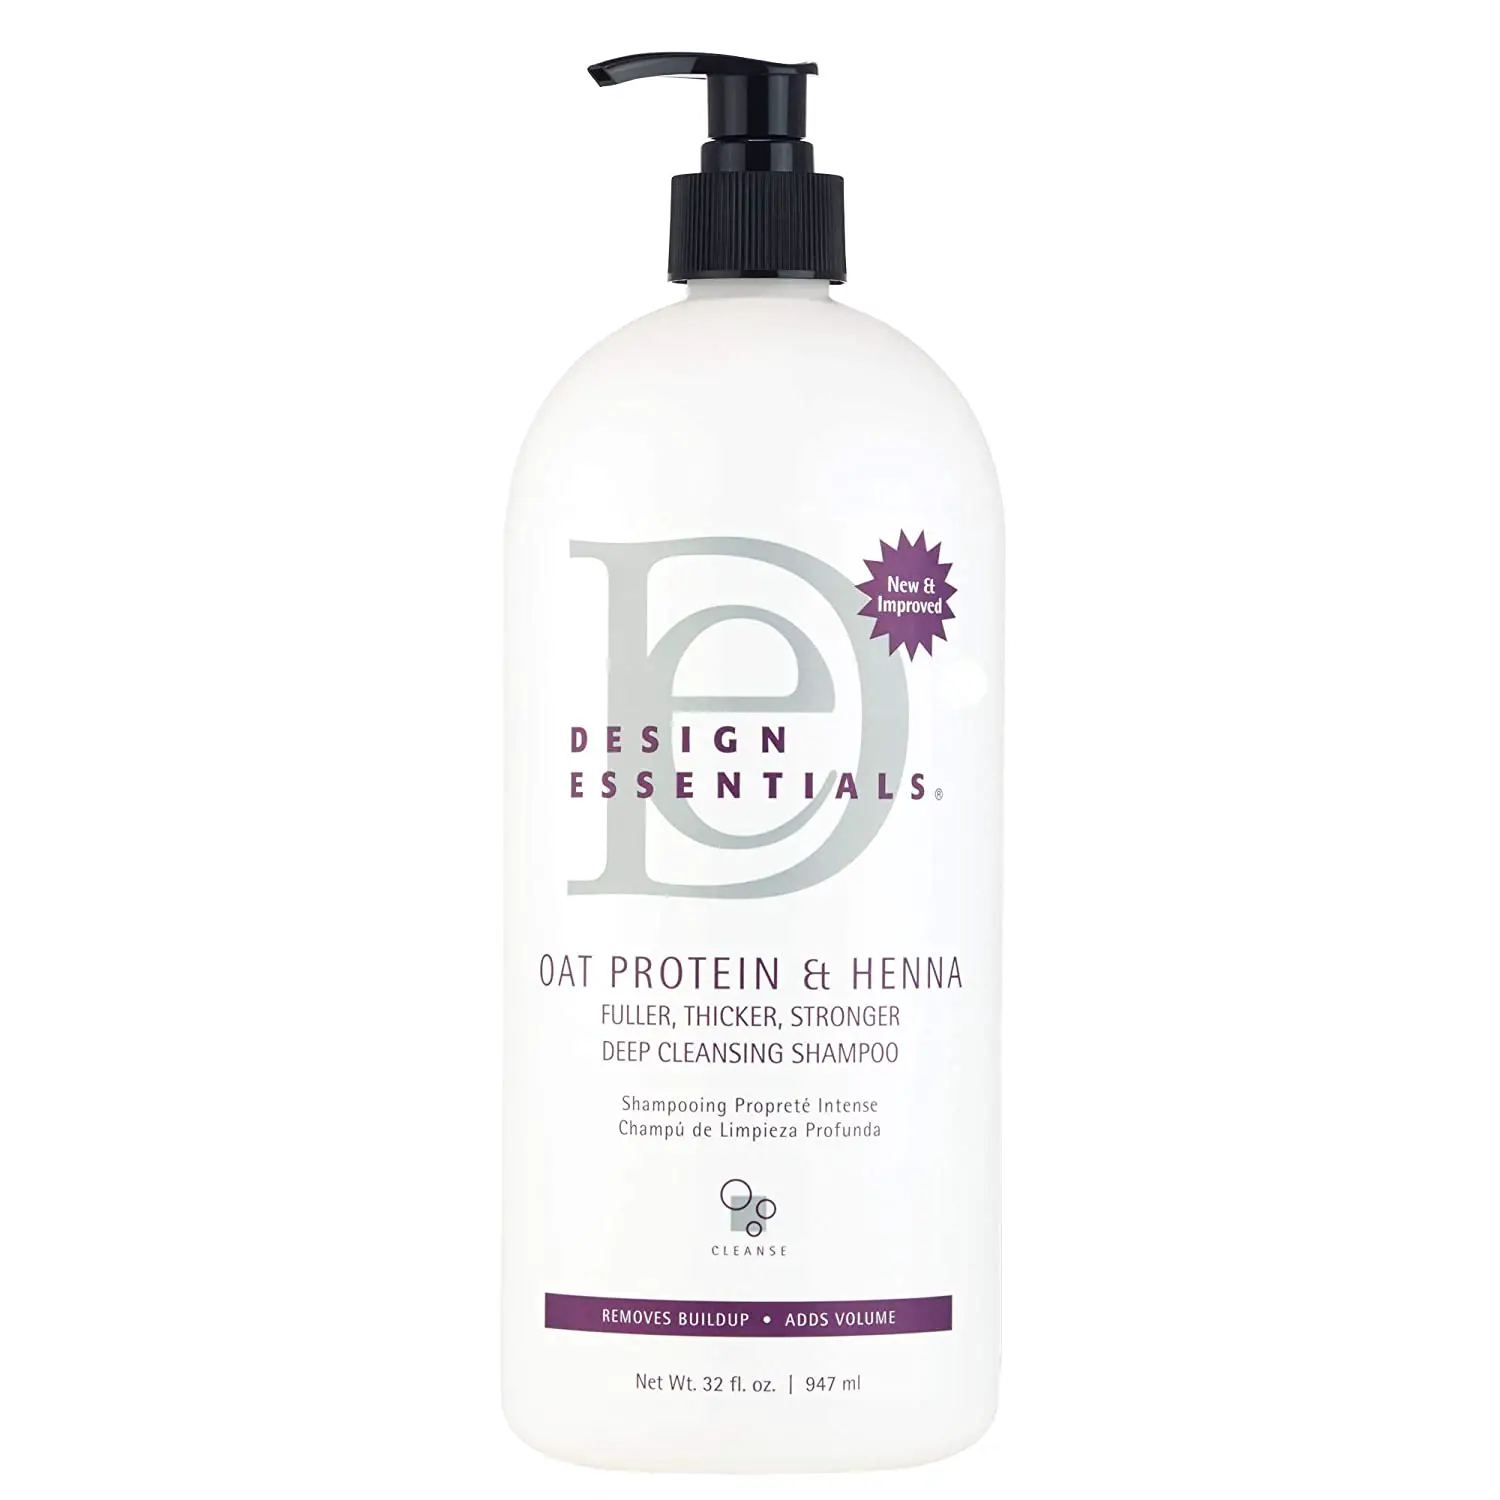 Design Essentials Oat Protein and Henna Deep Cleansing Shampoo